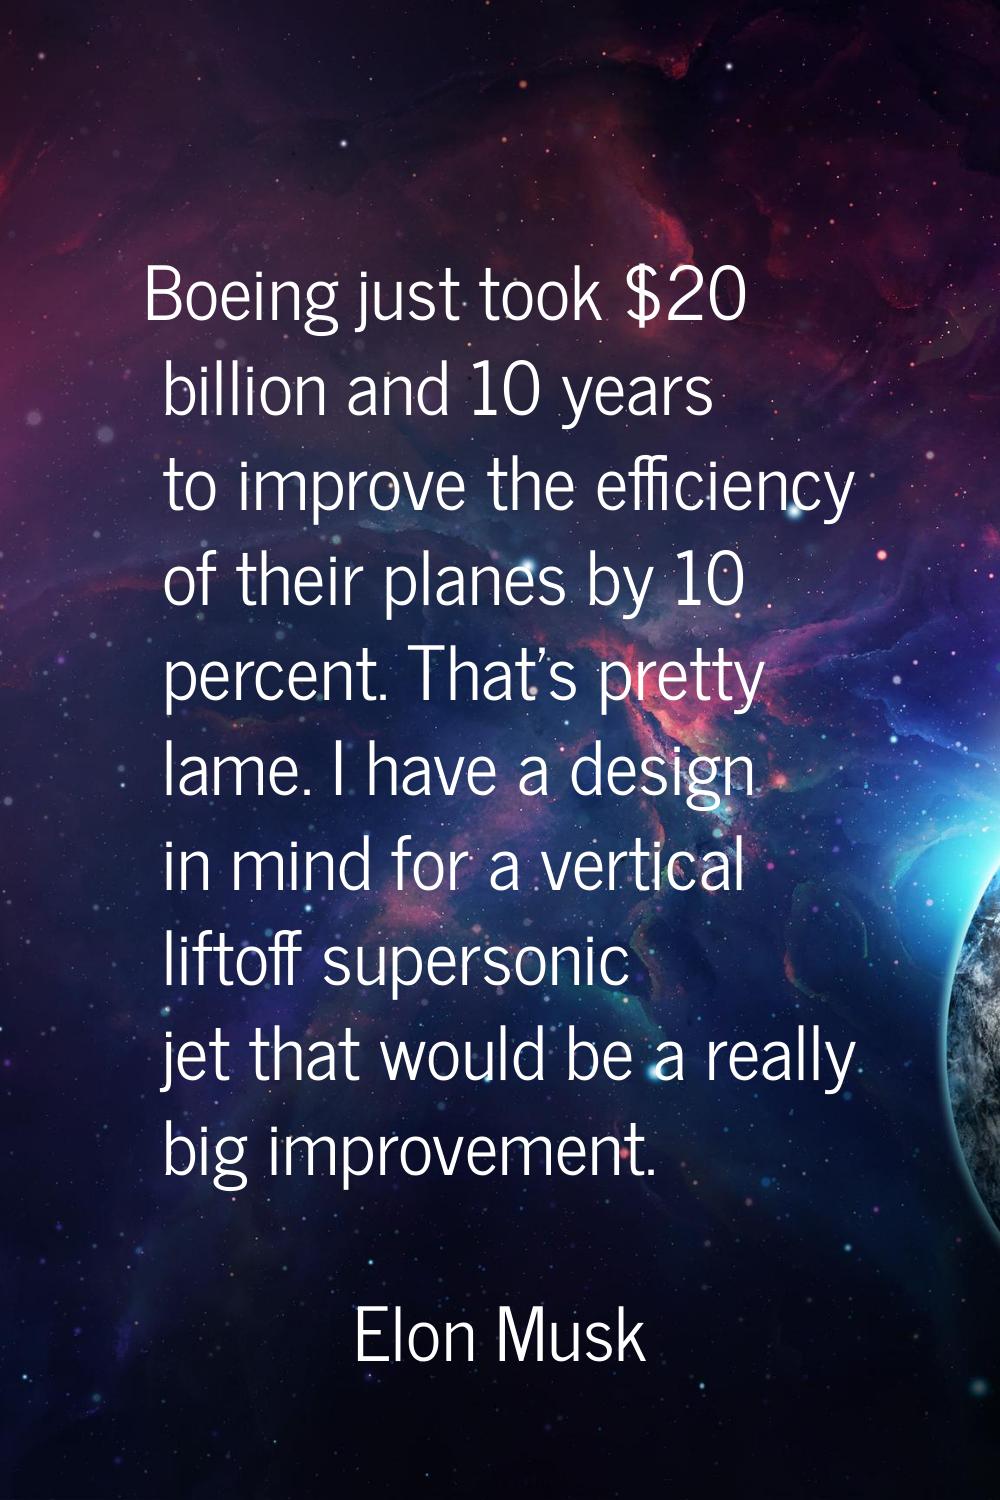 Boeing just took $20 billion and 10 years to improve the efficiency of their planes by 10 percent. 